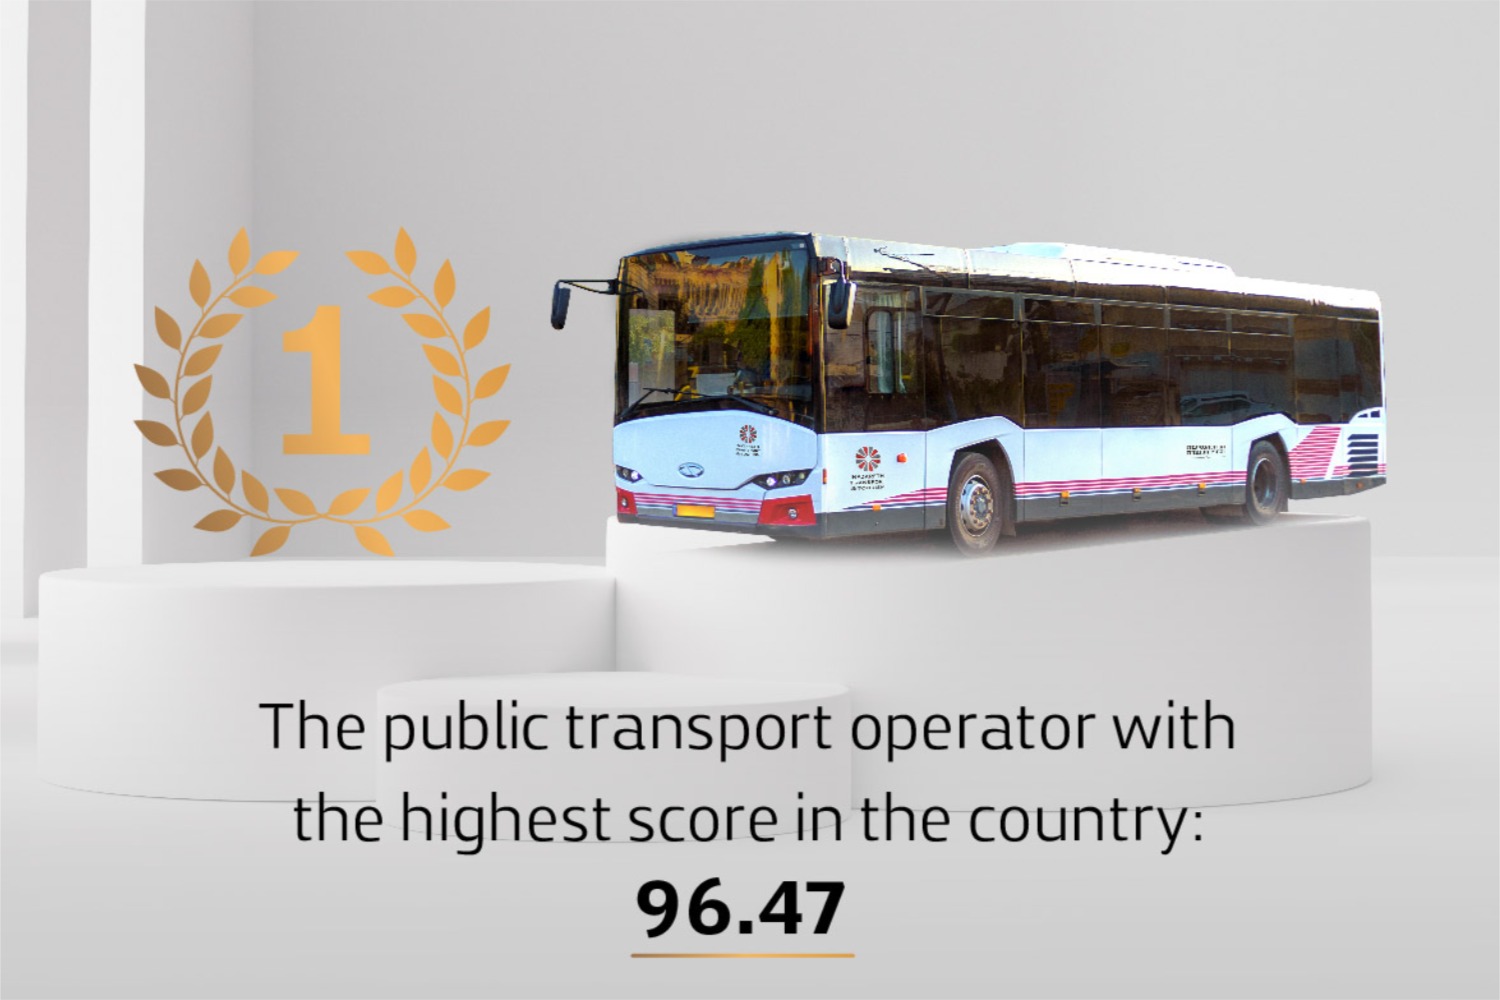 The Public transport operator with the highest score in the country 96.47